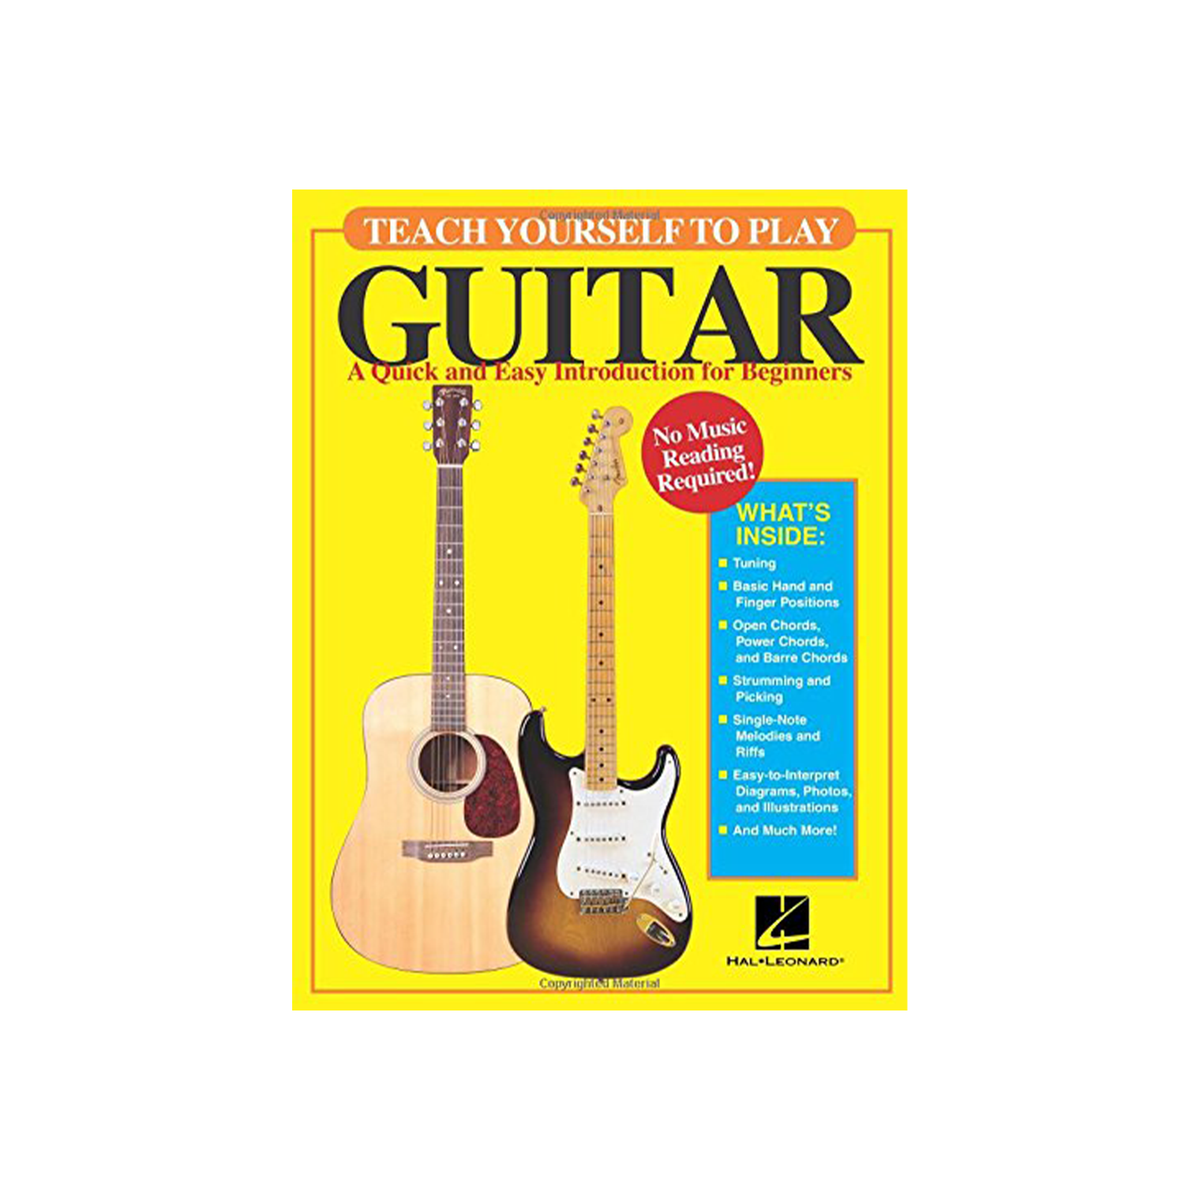 teach-yourself-to-play-guitar-a-quick-and-easy-introduction-for-begin